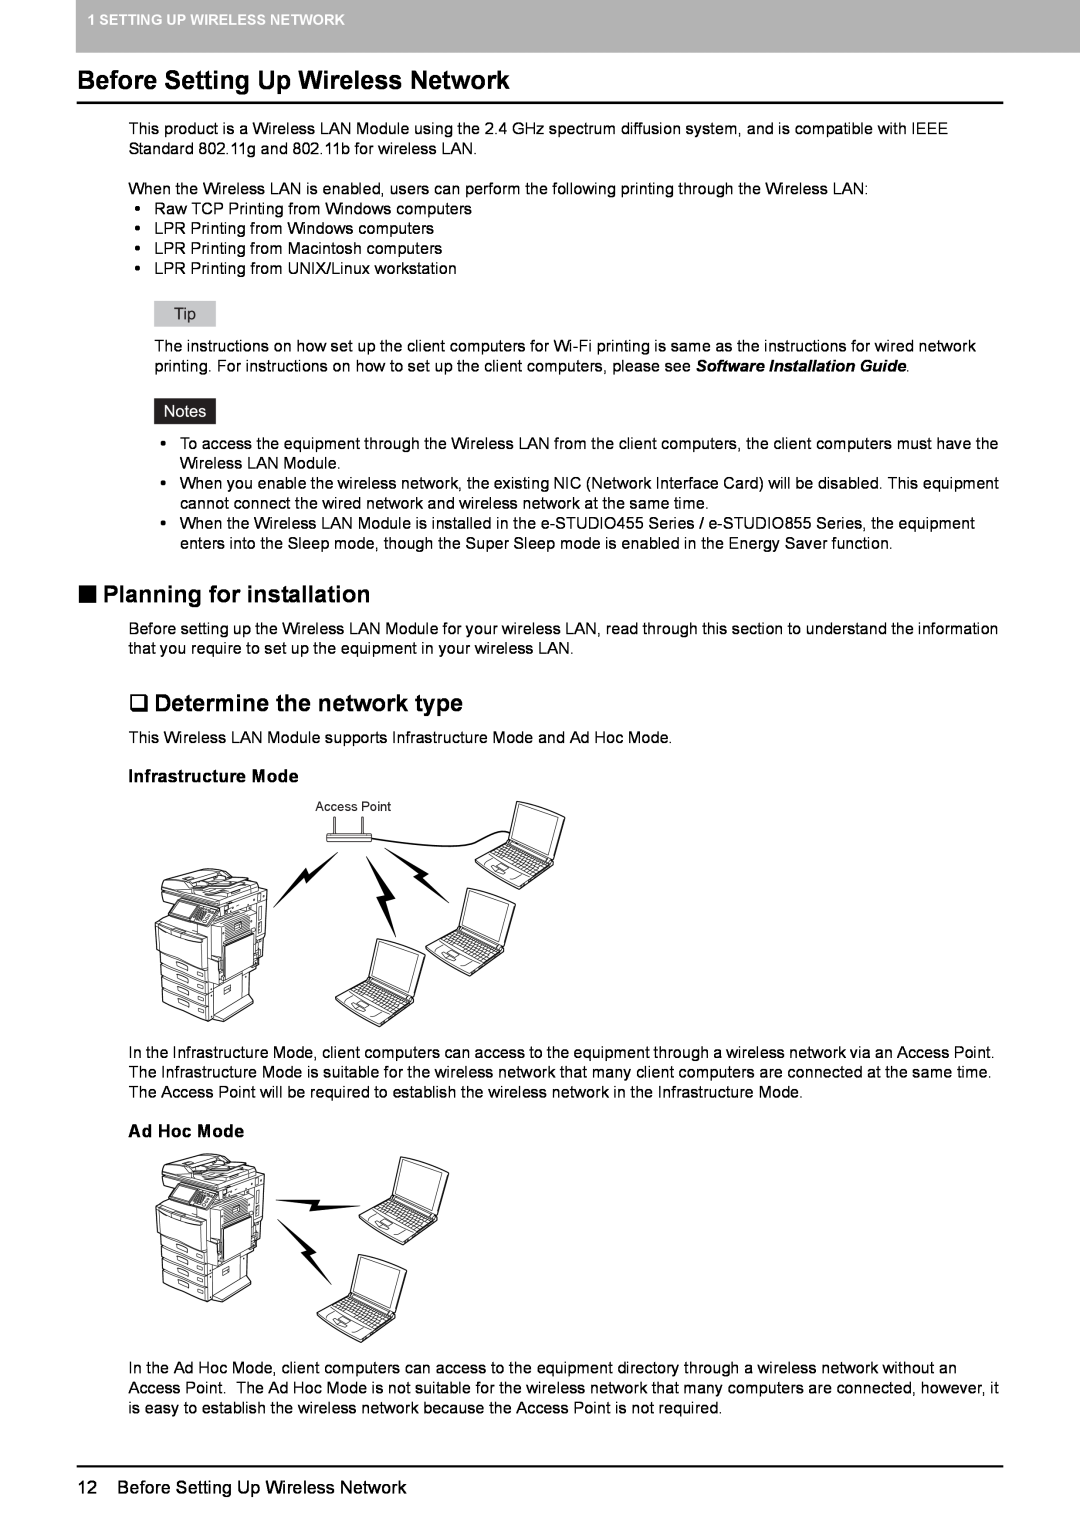 Toshiba GN-1050 manual Before Setting Up Wireless Network, „ Planning for installation, ‰ Determine the network type 